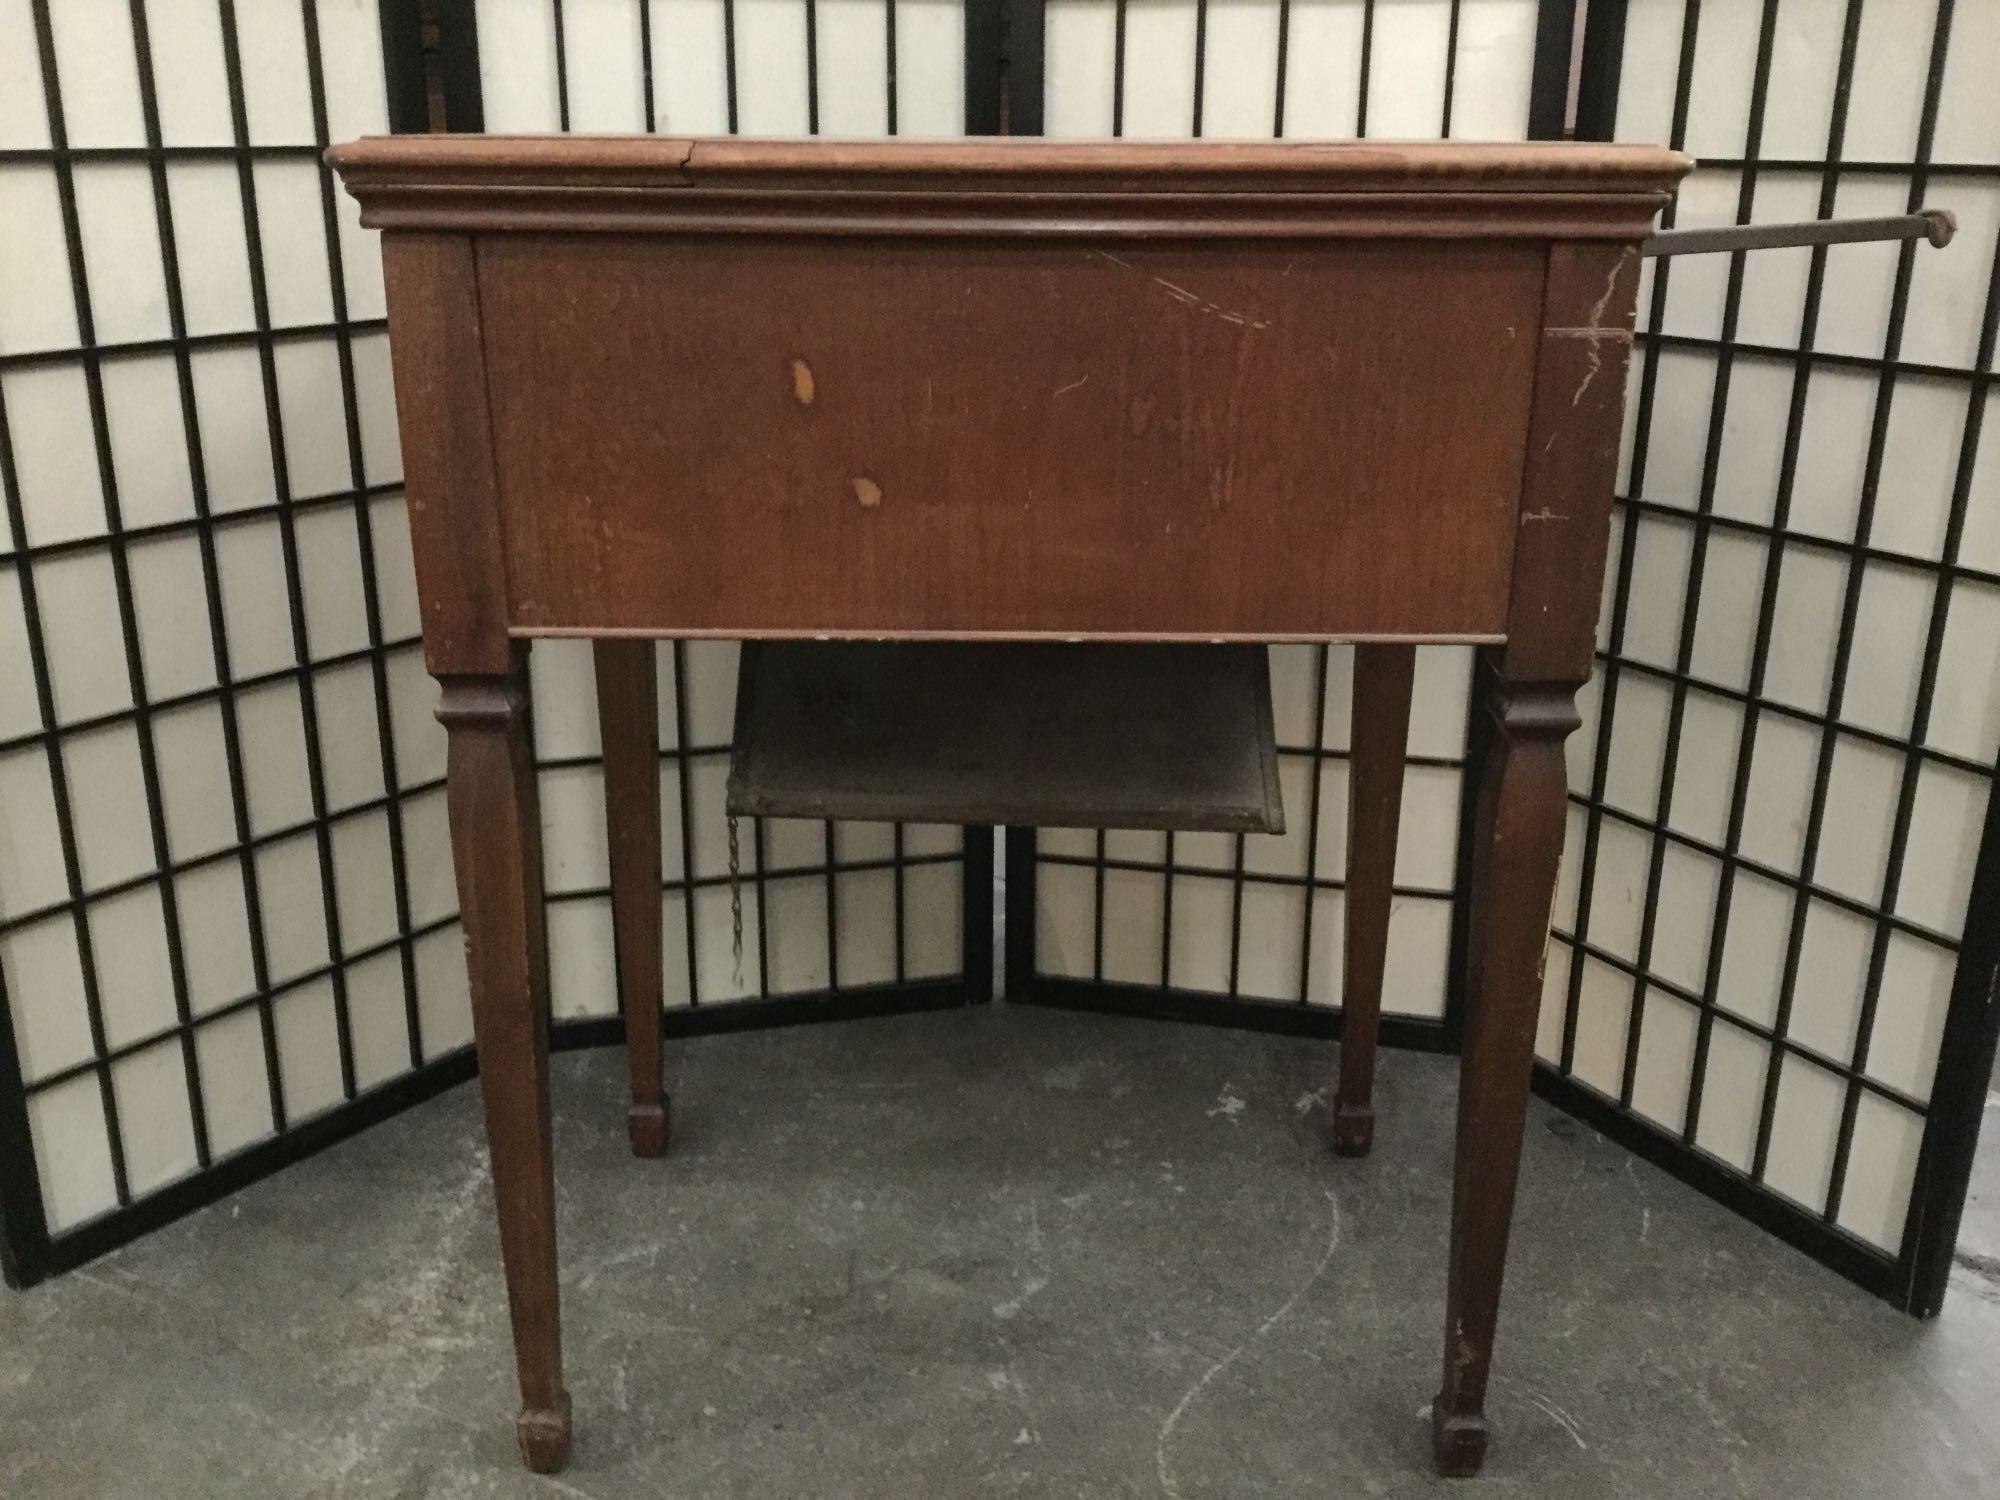 Vintage maple sewing cabinet with no machine, worn top - sold as is